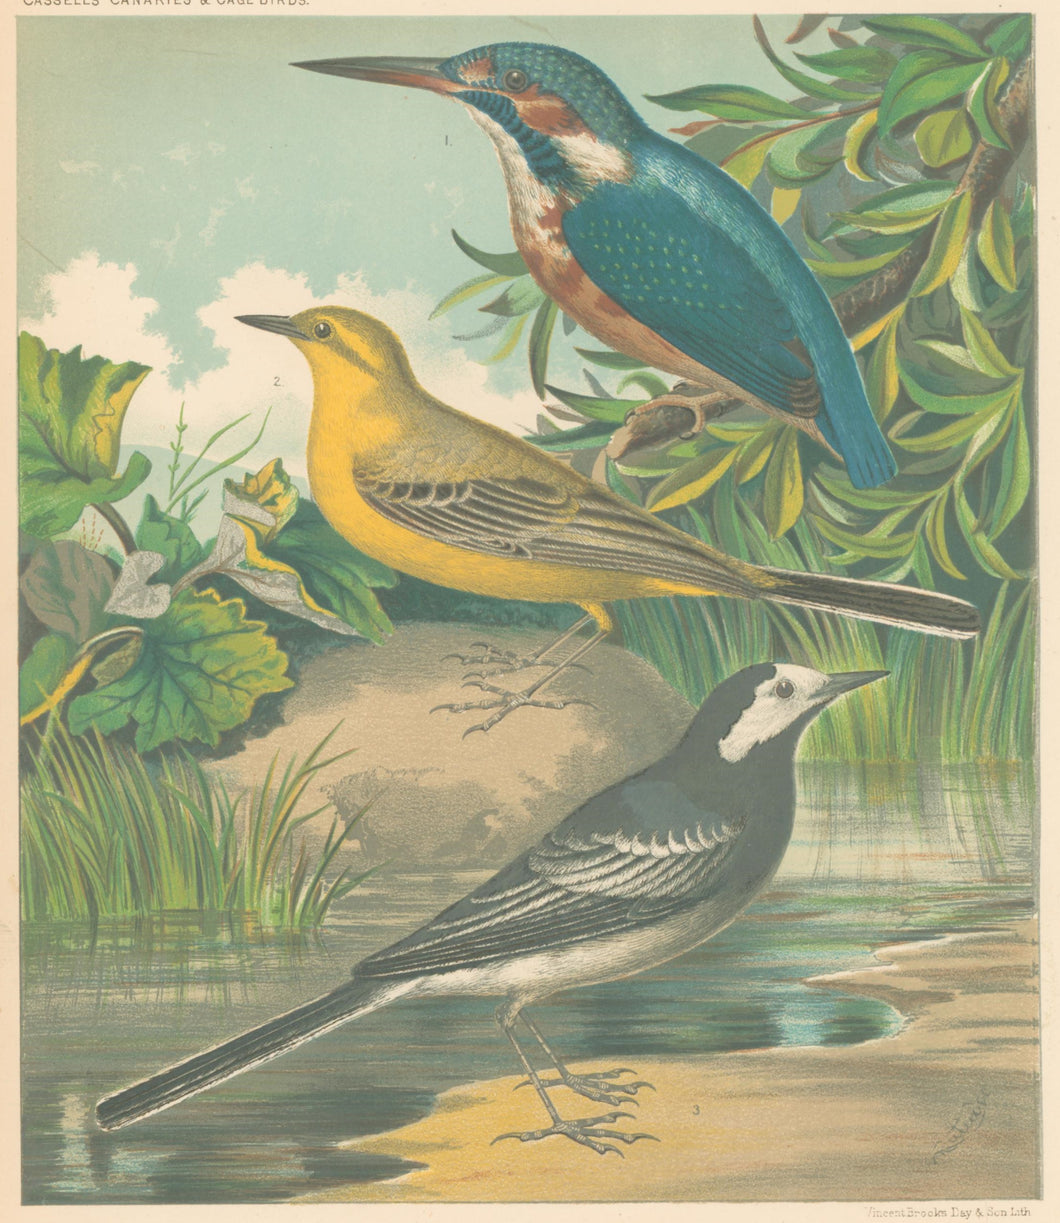 Rutledge, W. “King-Fisher, Yellow-Wagtail, Pied-Wagtail